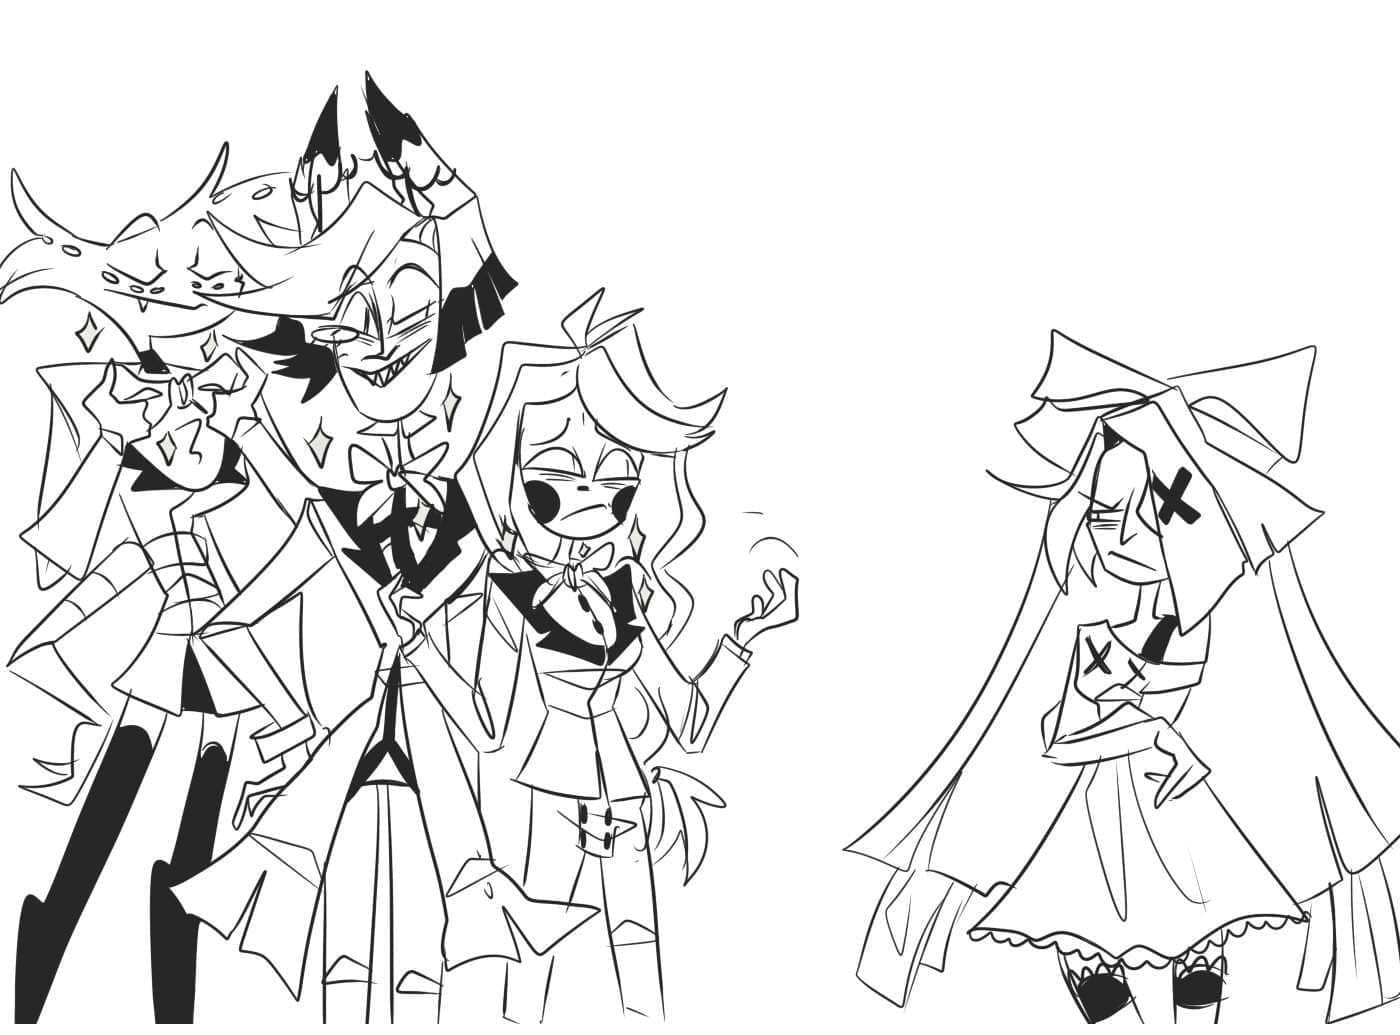 Characters from Hazbin Hotel coloring page - Download, Print or Color ...